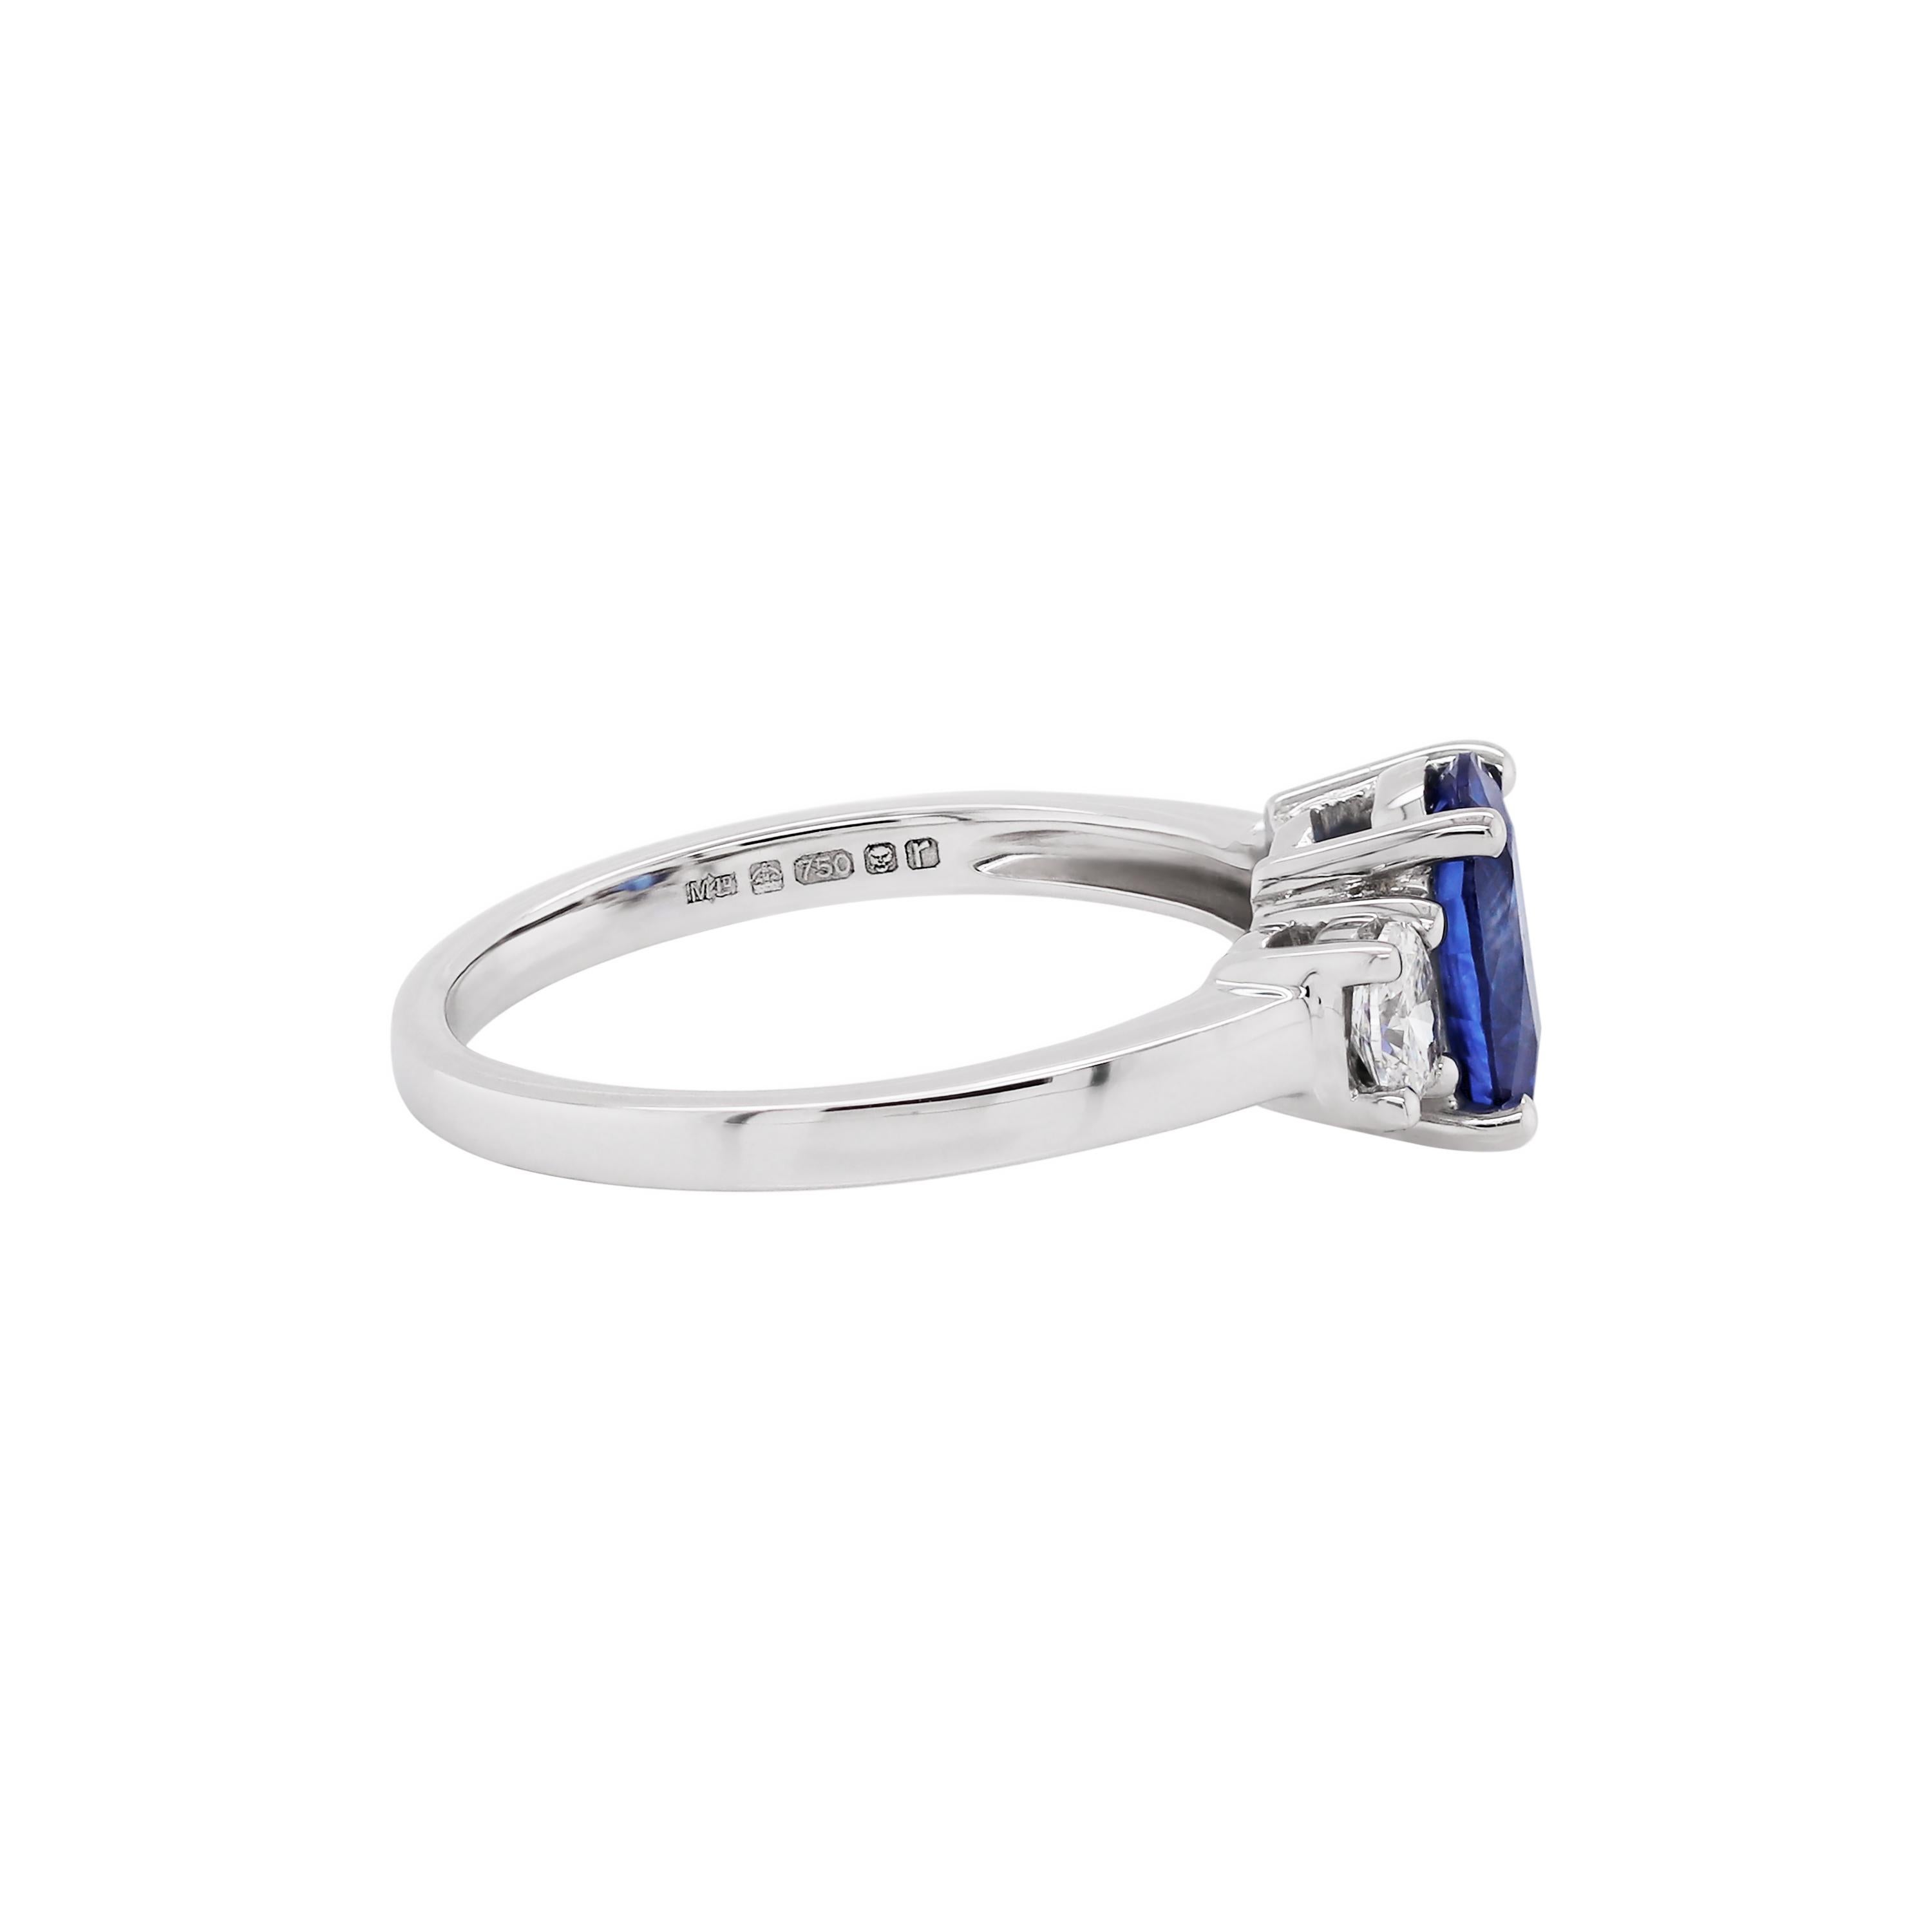 Exquisite 18 carat white gold engagement ring featuring a 1.59ct transparent blue oval shaped sapphire in the centre, in a four claw, open back setting. The beautiful sapphire is accompanied by two round brilliant cut diamonds, one on either side,